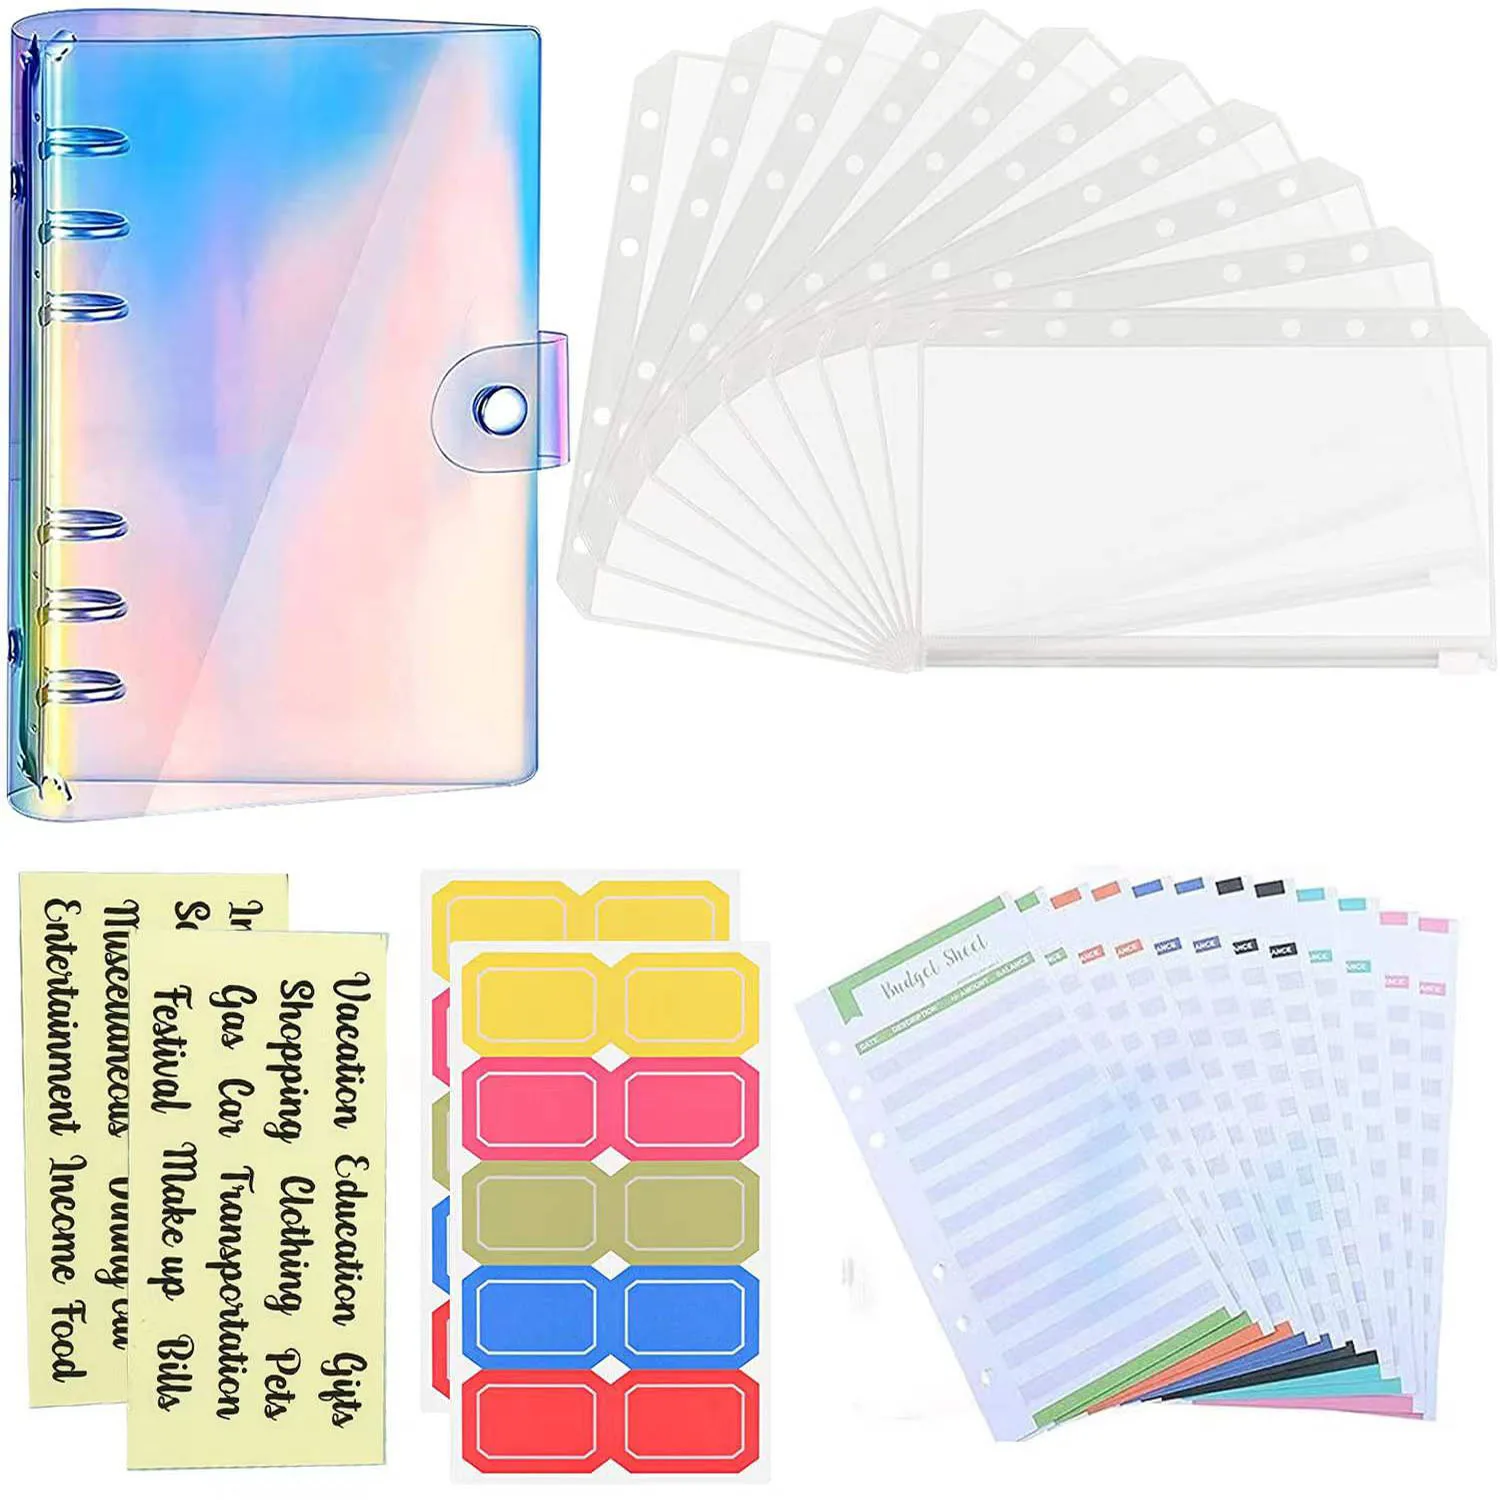 цена A6 Budget Binder Waterproof Cash Envelopes Notebook Organizer System with 10 Zipper Pockets,12 Budget Sheet and Label Stickers